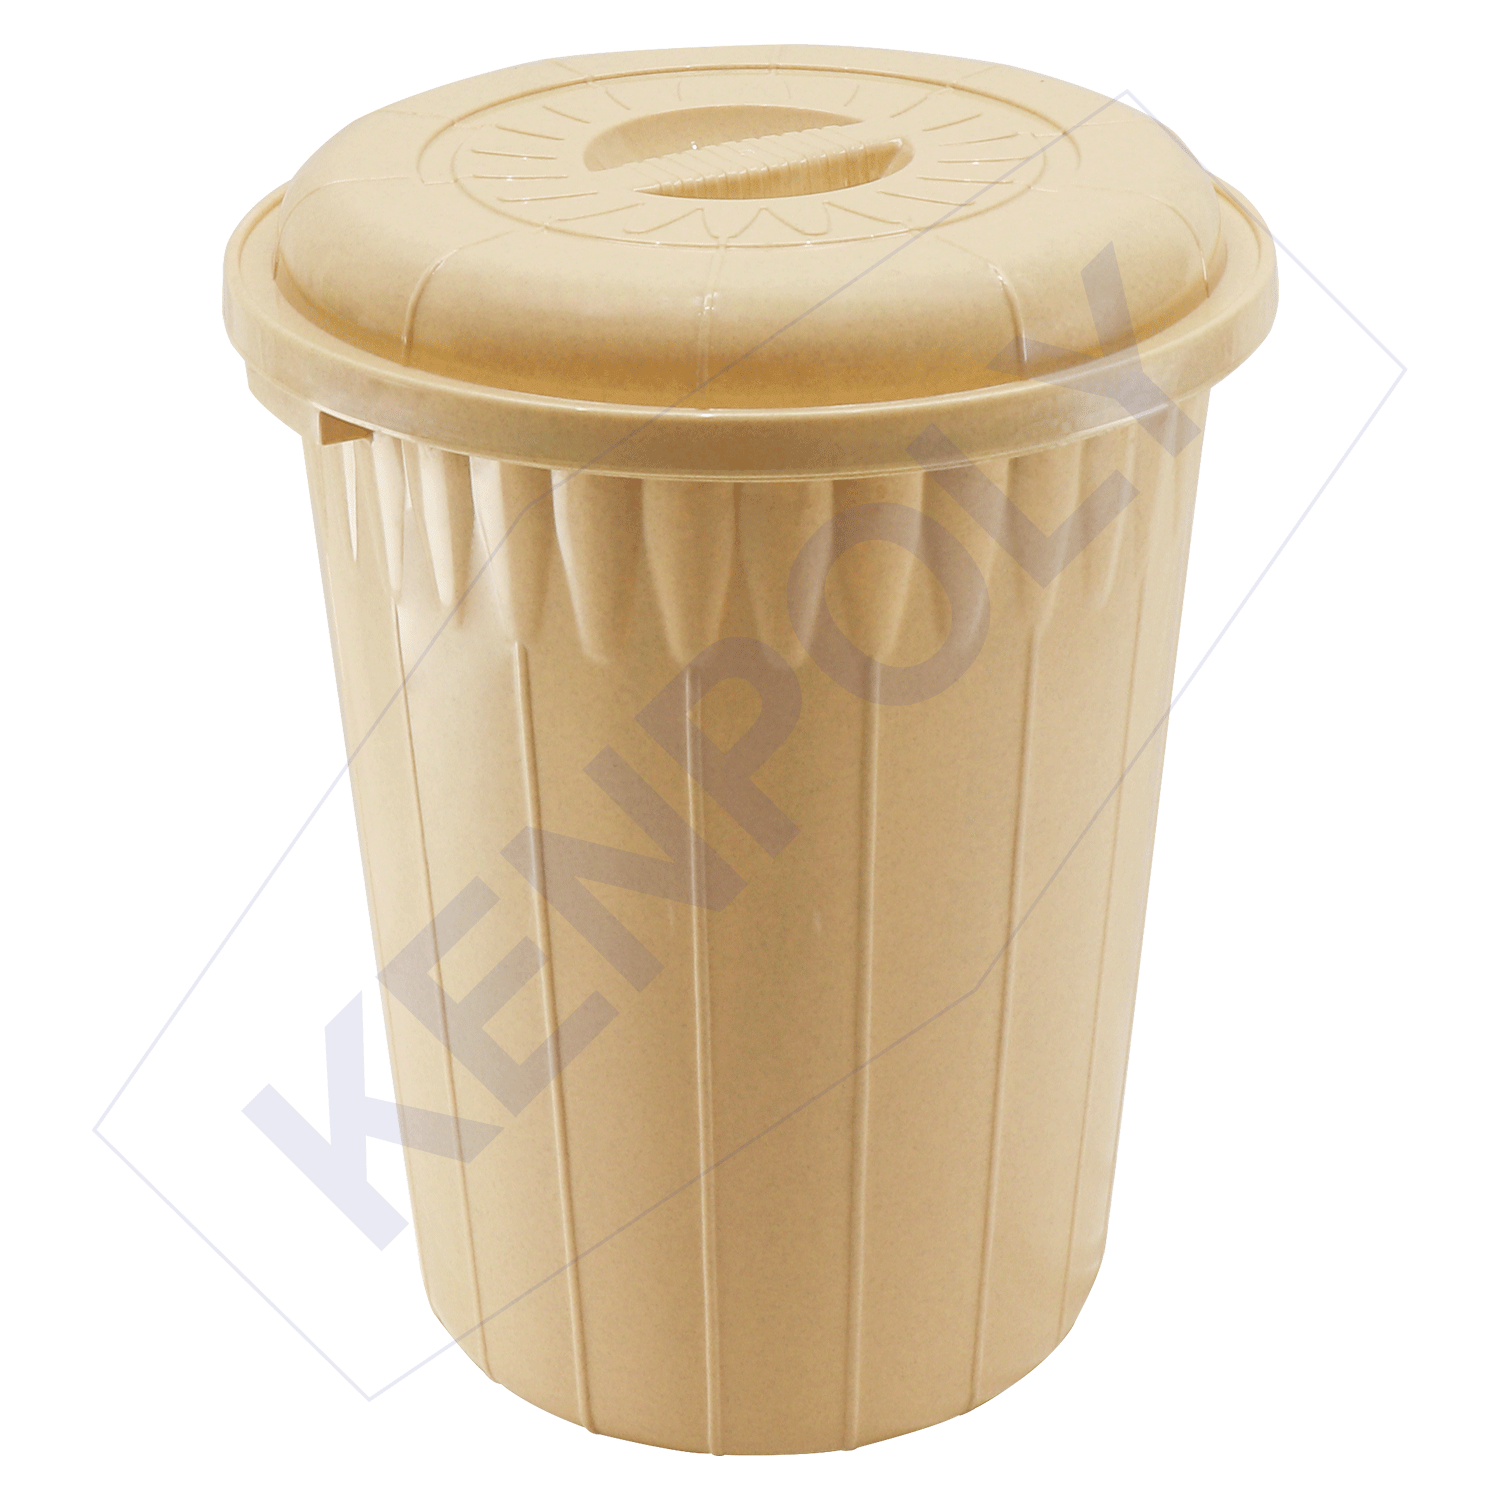 Kenpoly drum 120 H785 x Dia570 mm Capacity 120 Ltrs (cream) Can be used as dust bin